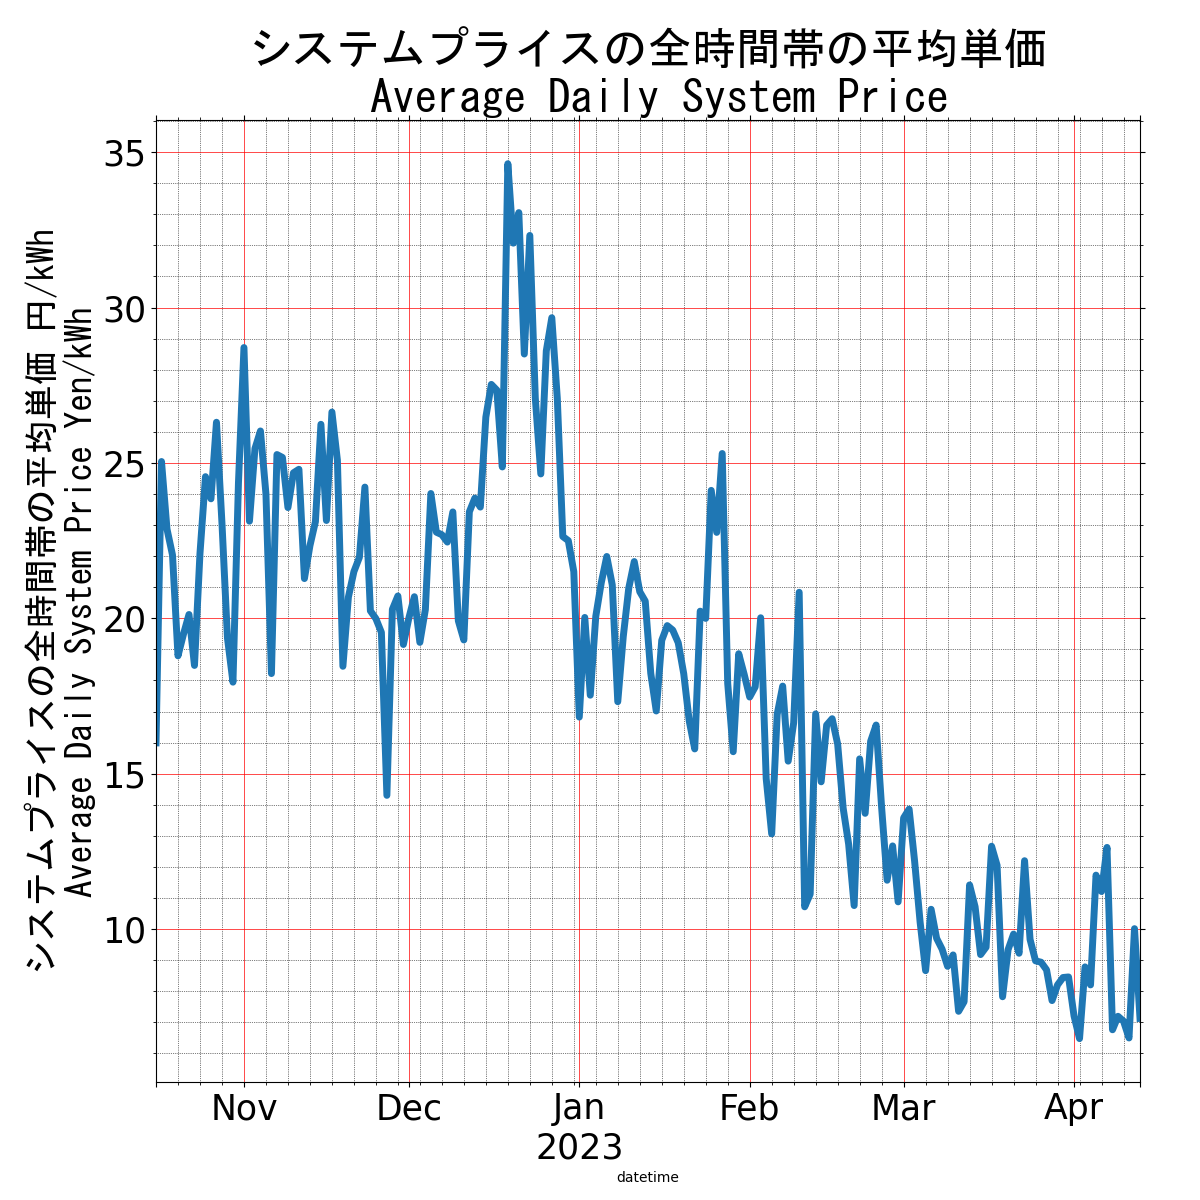 Japanese Electricity JEPX System Price plotted over time for the last 90 days